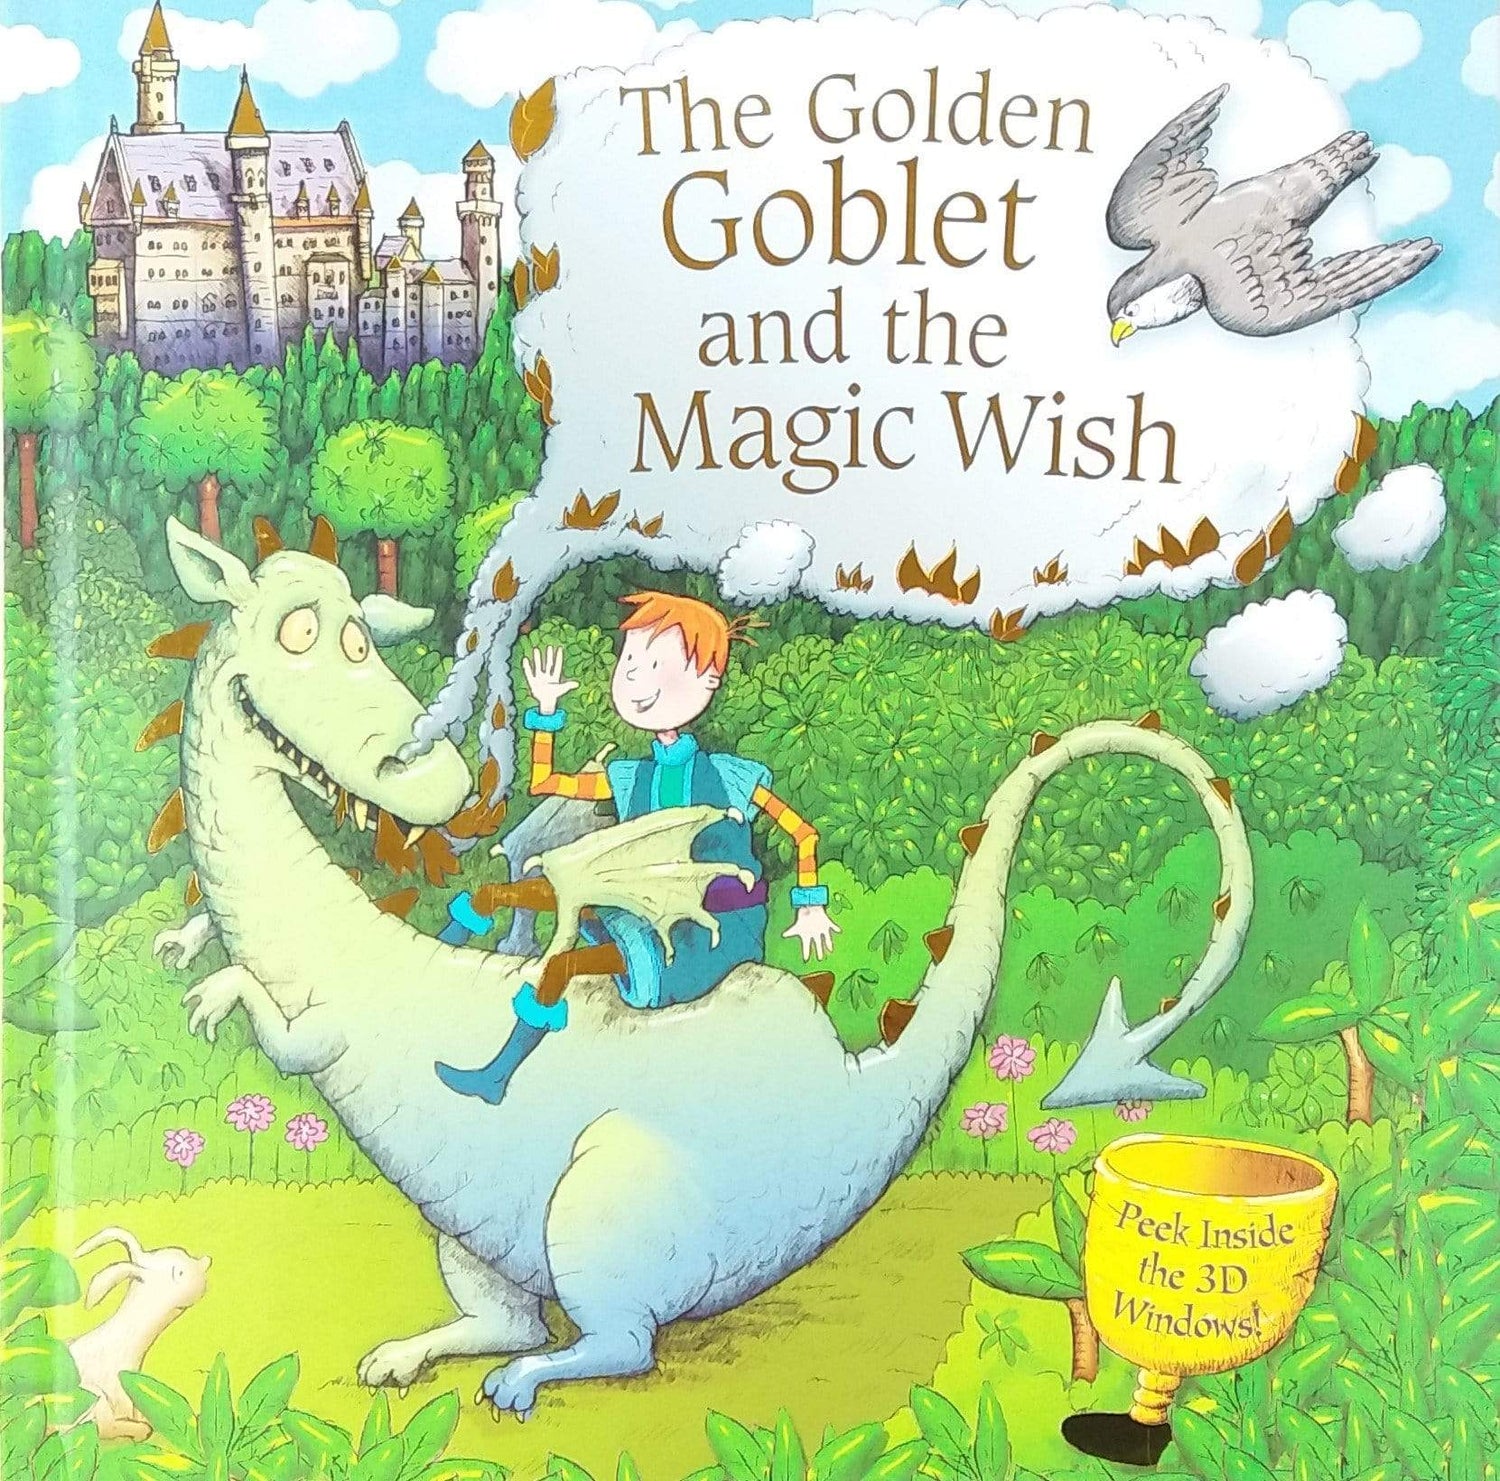 The Golden Goblet and the Magic Wish